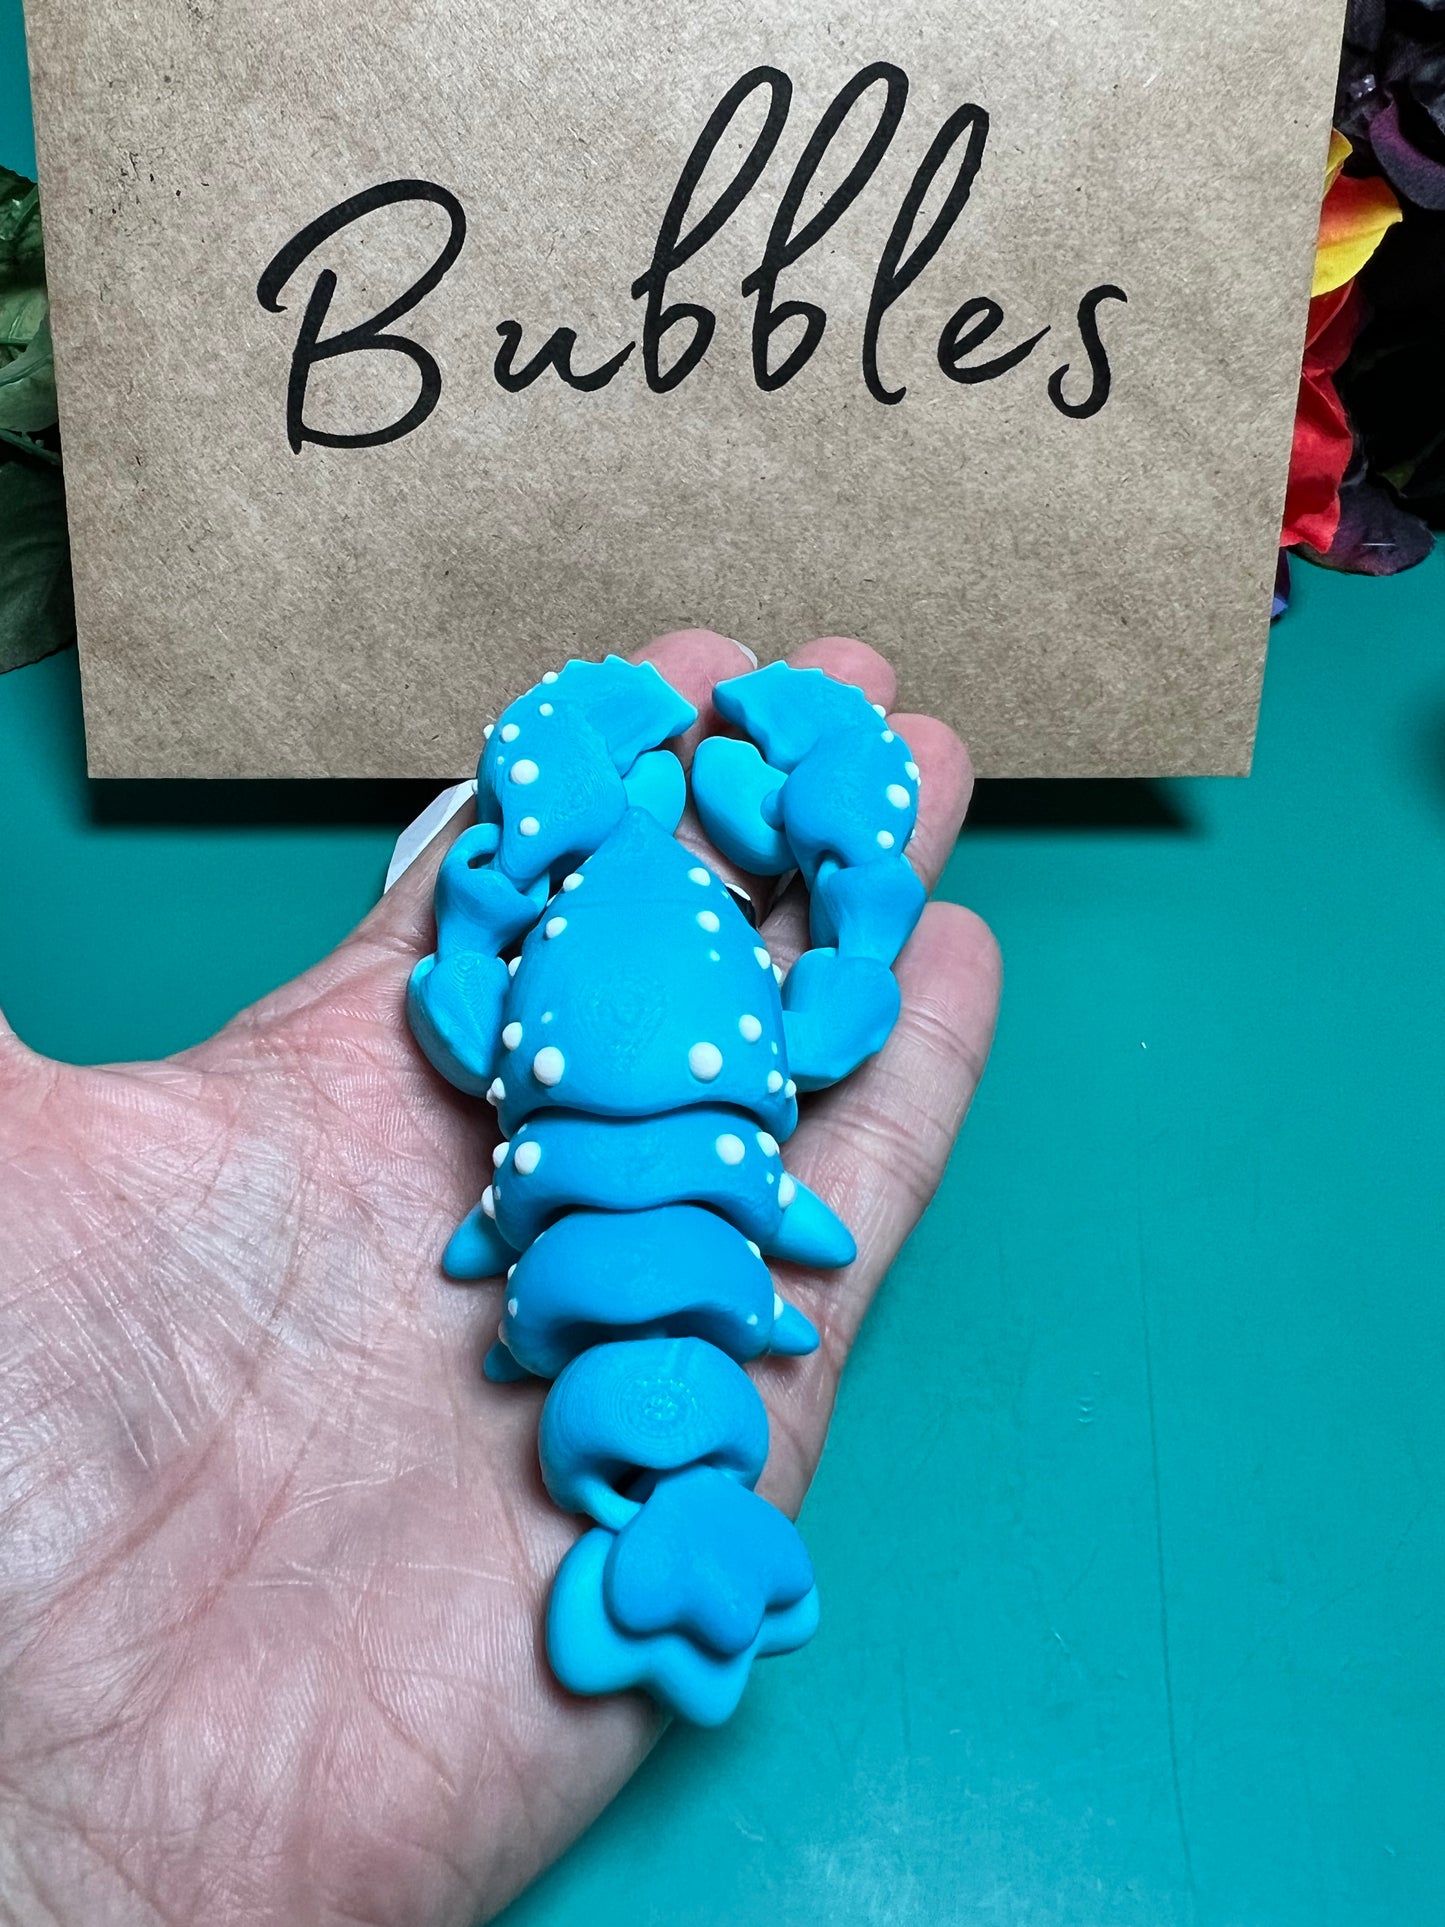 Bubbles - The Blue Lobster  - Mythical Pets